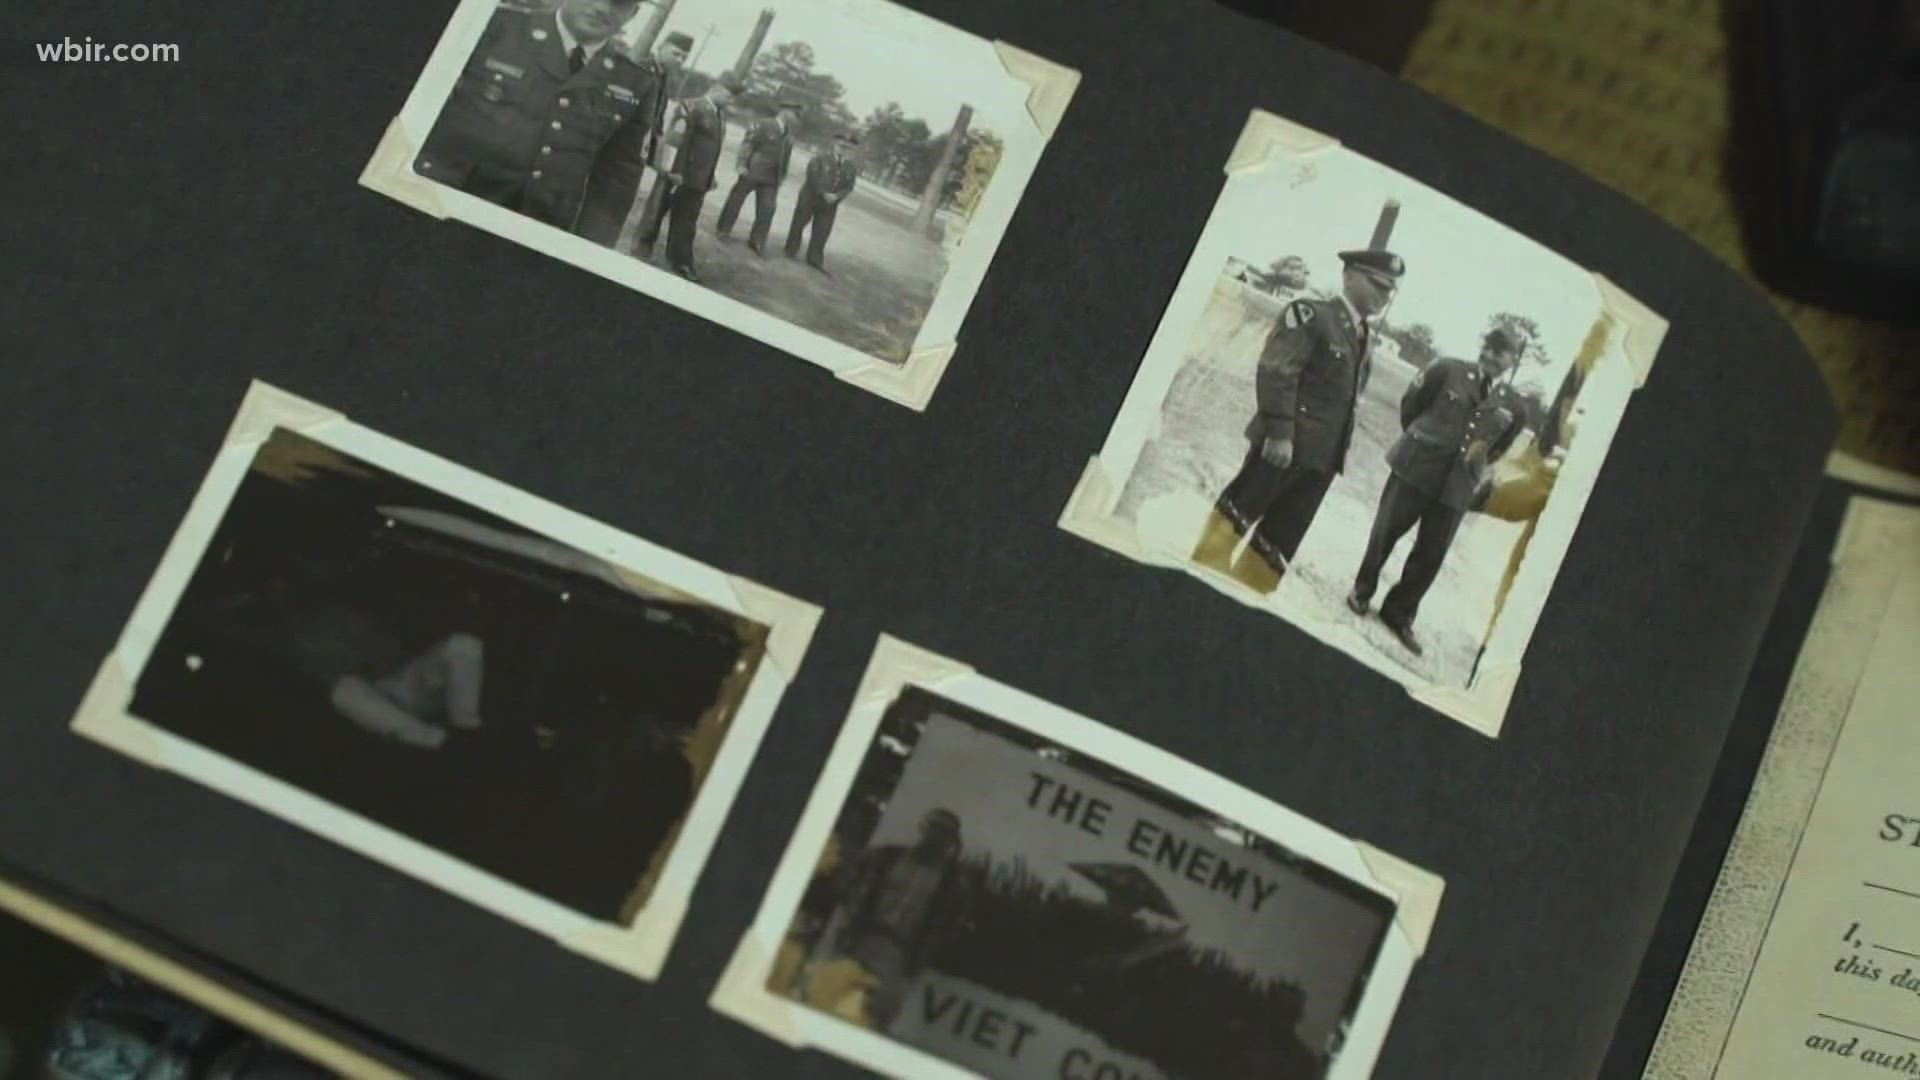 Charlie's Box holds long-lost photos, letters, and medals his siblings have never seen of their brother killed 50 years ago in Vietnam.